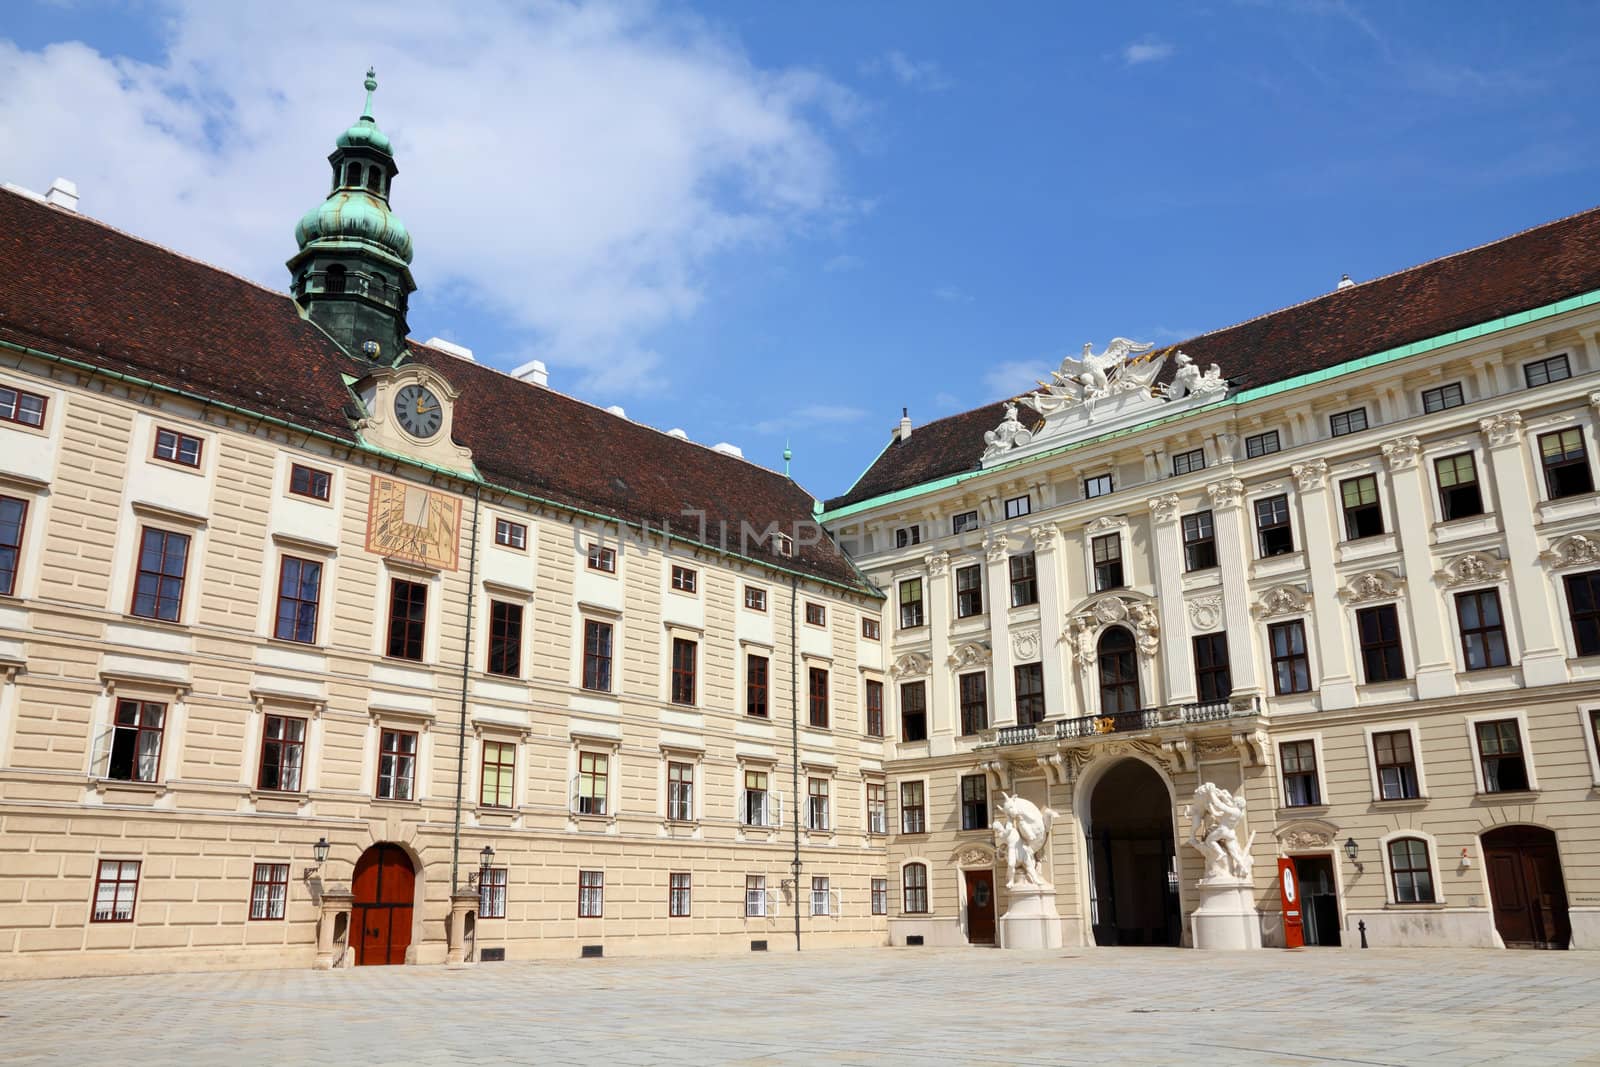 Vienna, Austria - Hofburg Palace courtyard. The Old Town is a UNESCO World Heritage Site.